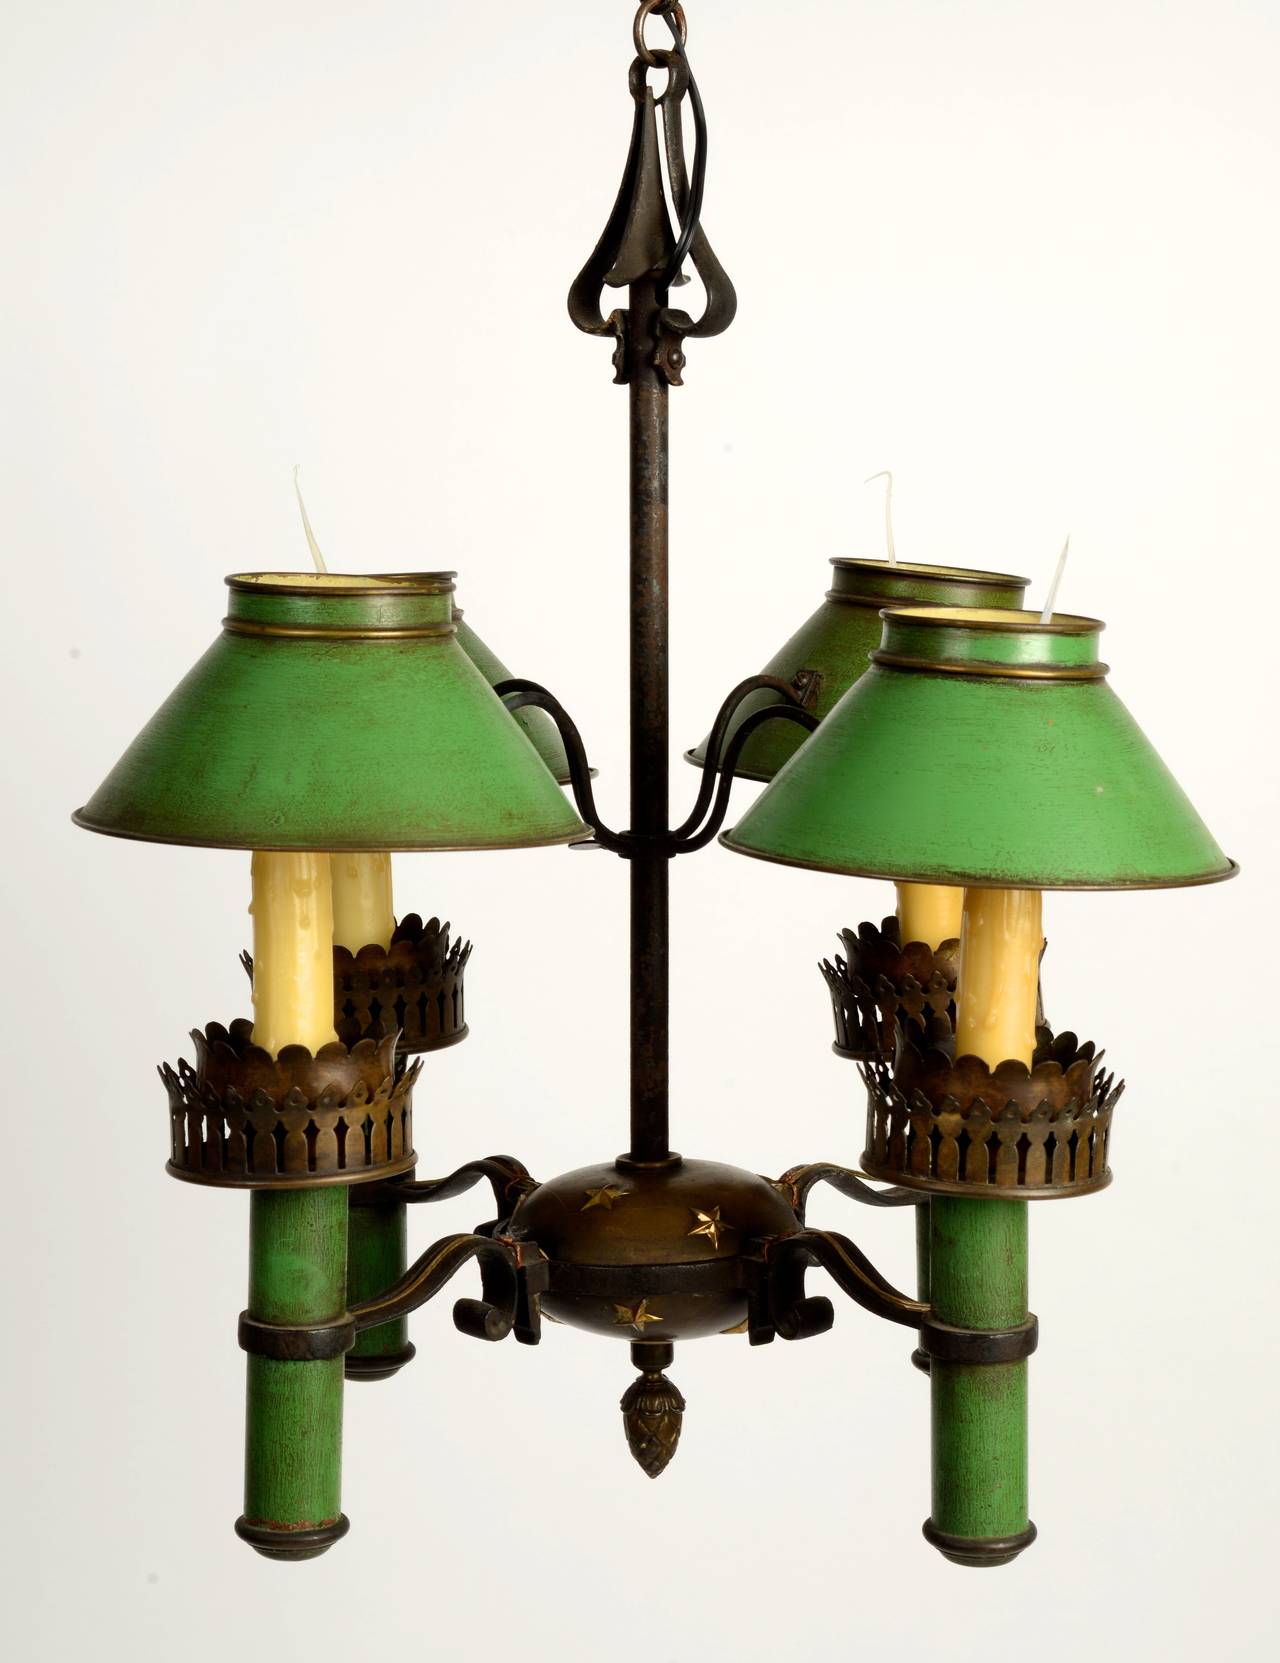 Painted tole and brass four-light chandelier, early 20th c. The chandelier has adjustable height shades. The body is of patinated brass with gilt brass stars on the top and bottom of the brass body. The shades and candle stems are green painted tole